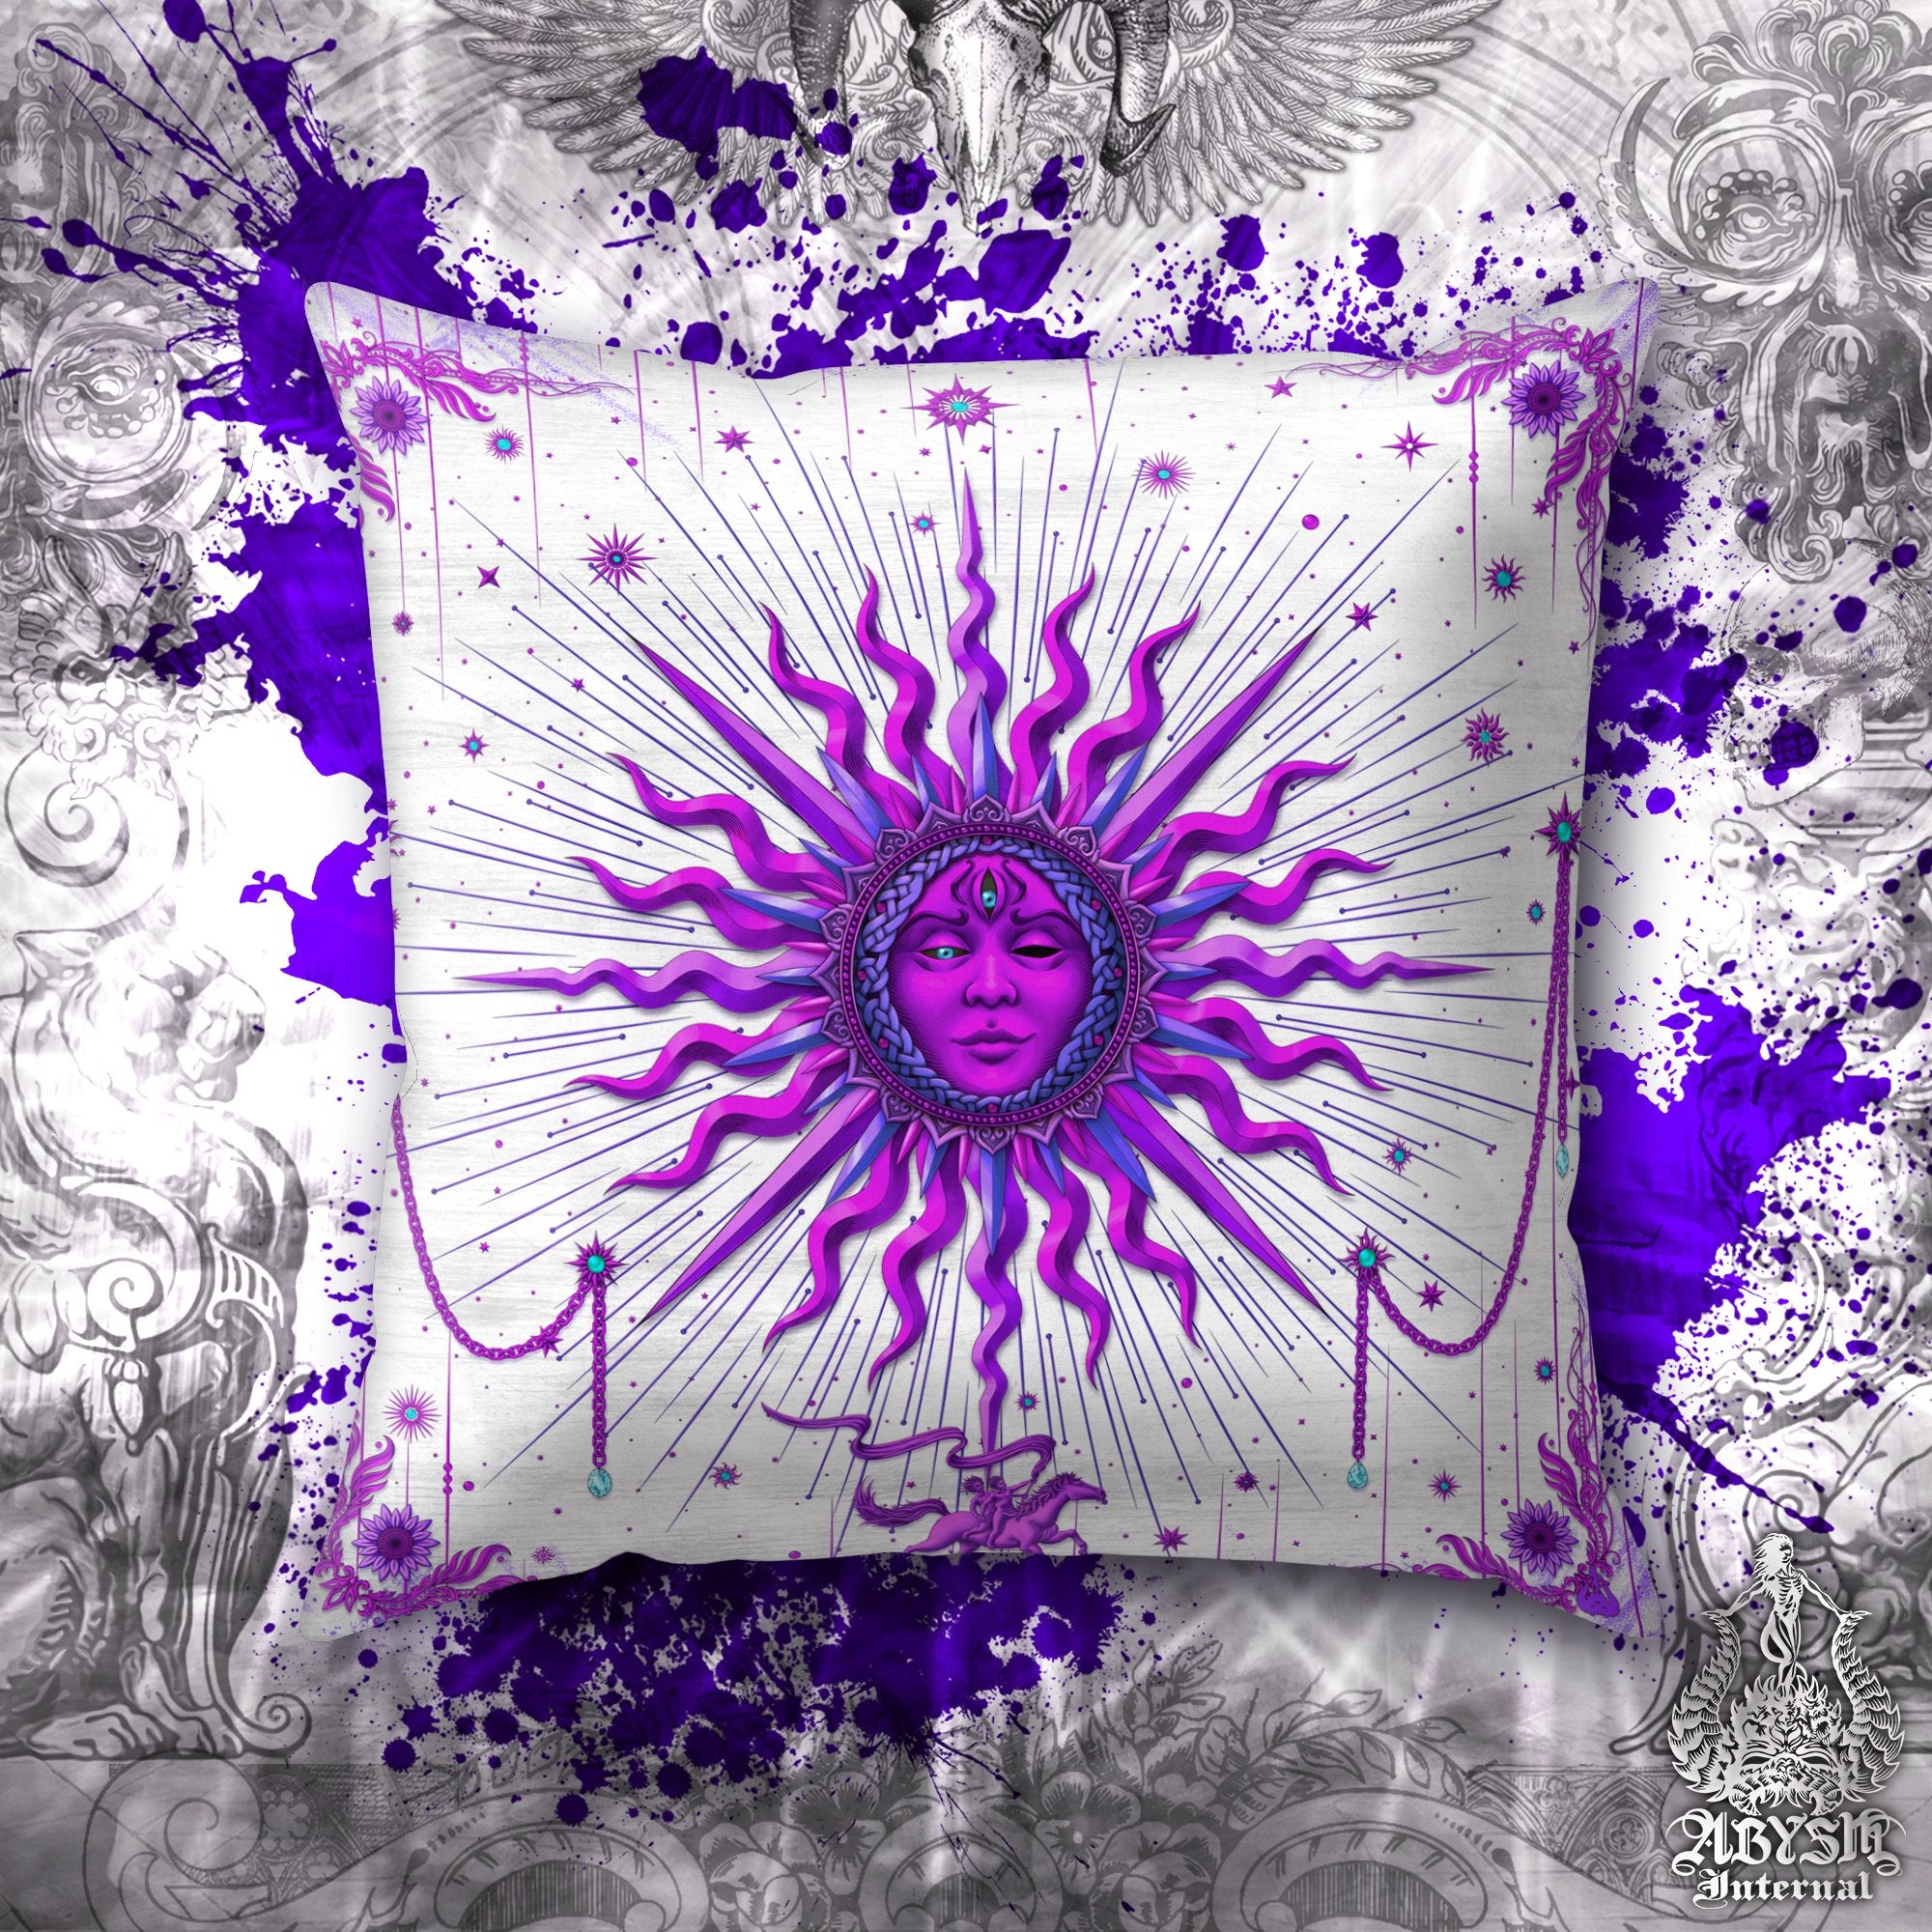 White Goth Throw Pillow, Witch Decorative Accent Pillow, Square Cushion Cover, Purple Sun, Arcana Tarot Art, Witchy Home, Fortune & Magic Room Decor - Abysm Internal